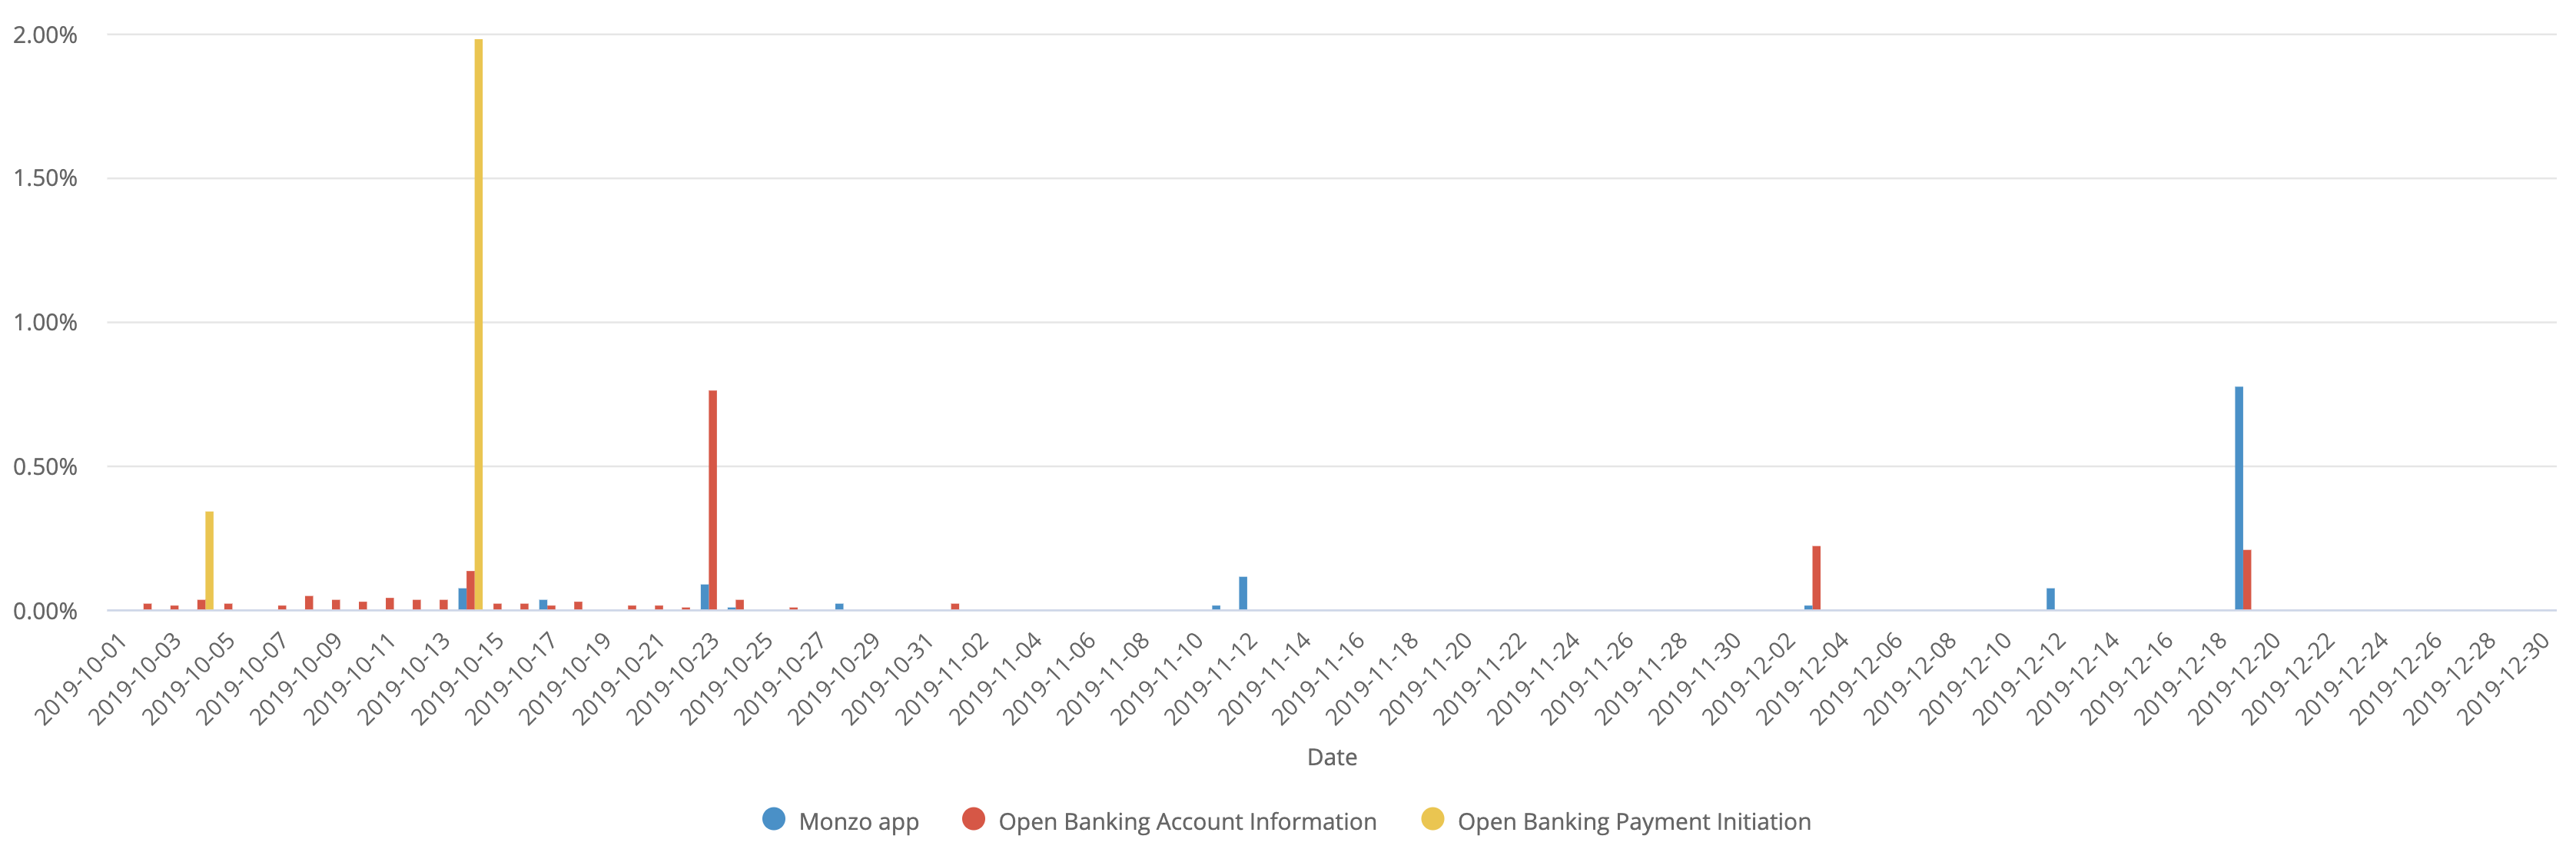 A chart showing the daily error rate of the Monzo App and Open Banking APIs. The data used to generate this chart is included in the table below.